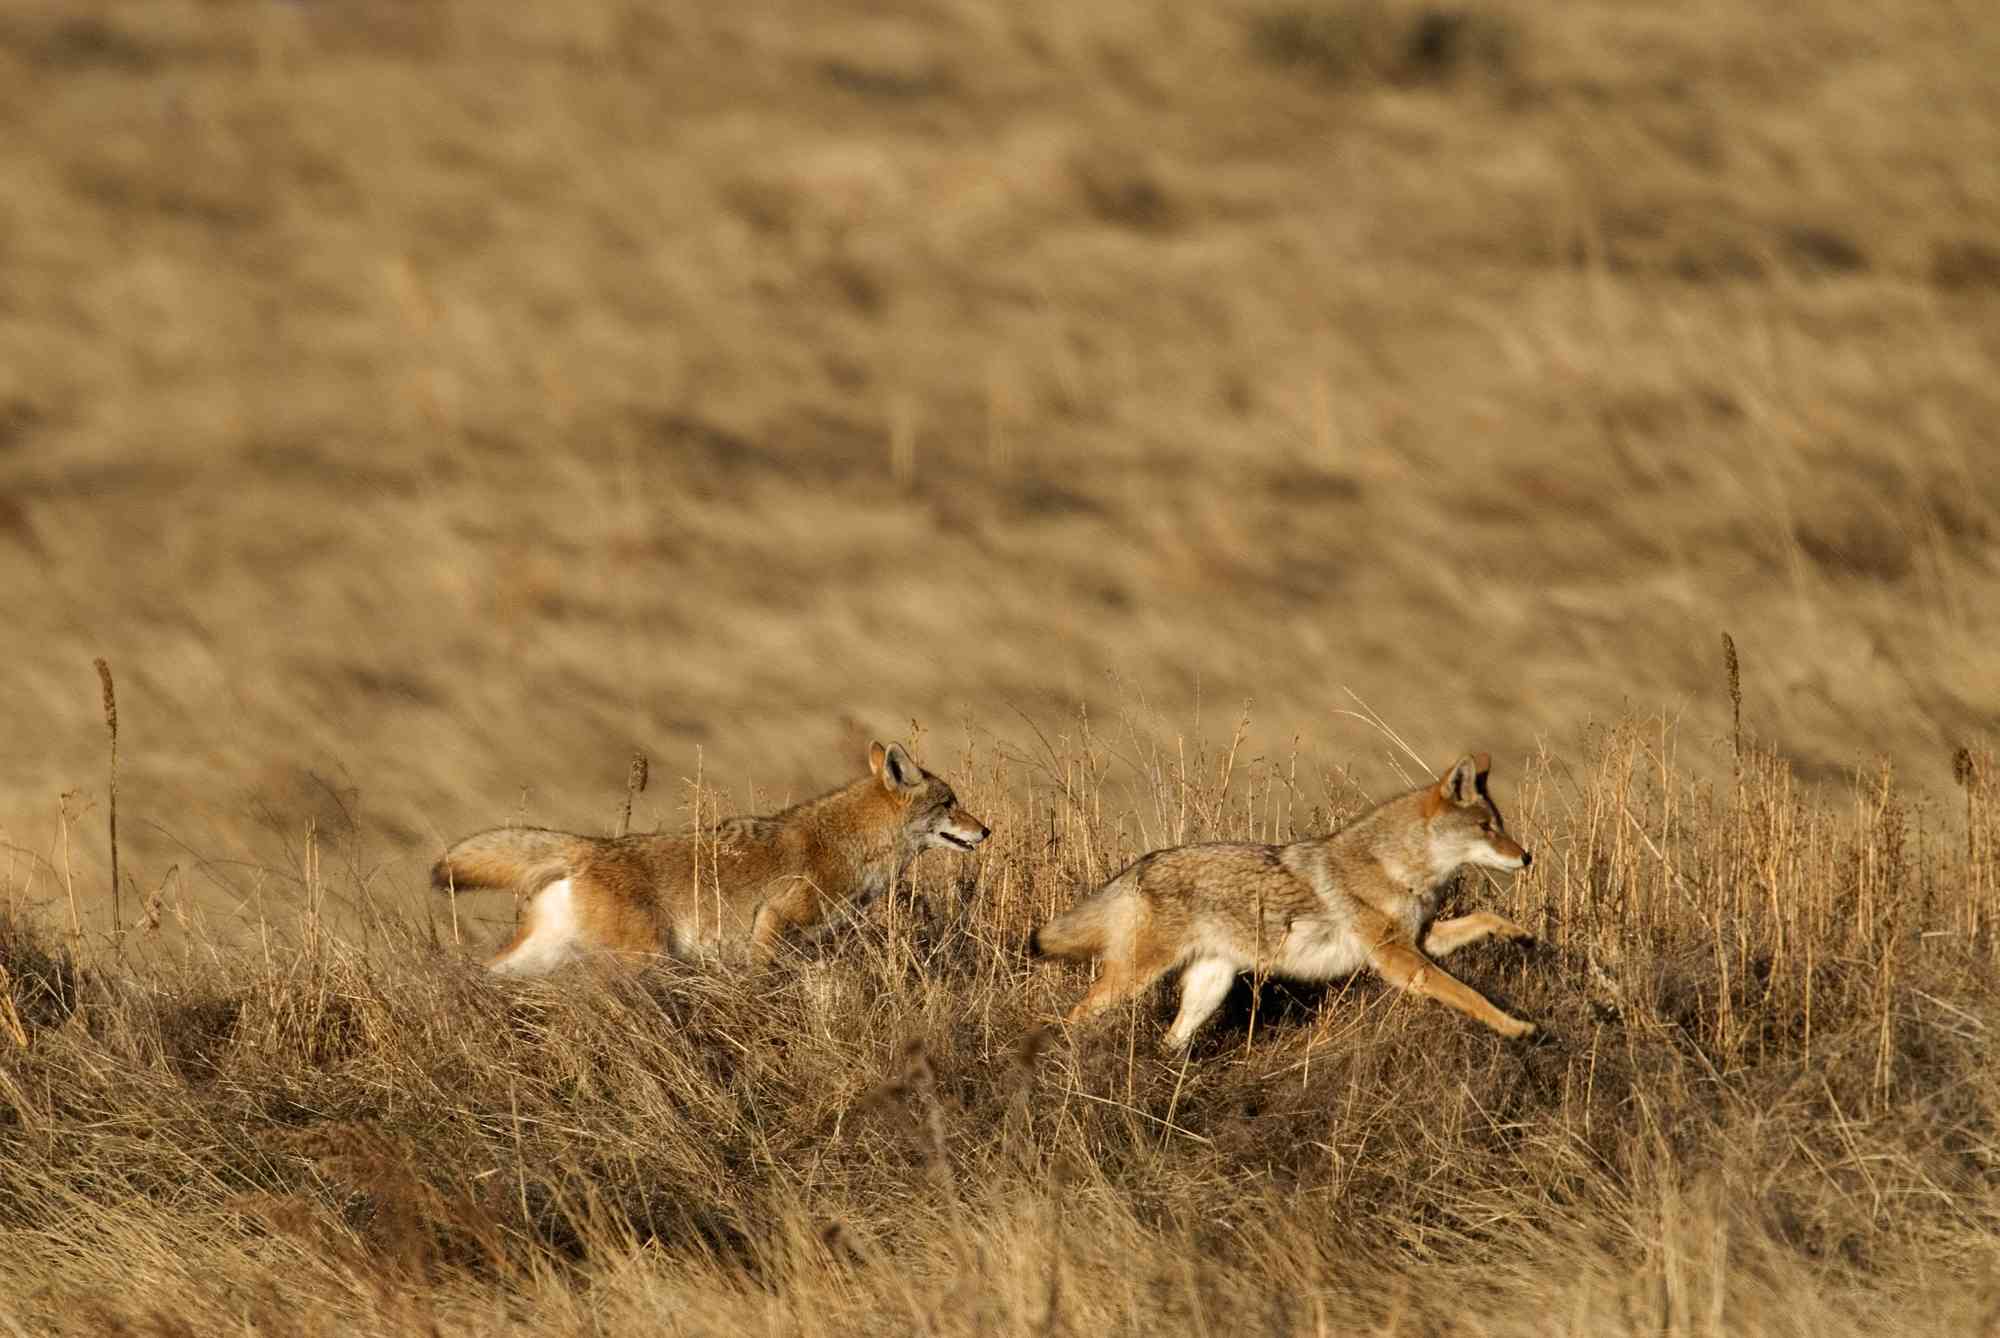 Coyotes Racing Through the Grass - Rocky Mountain Arsenal National Wildlife Refuge